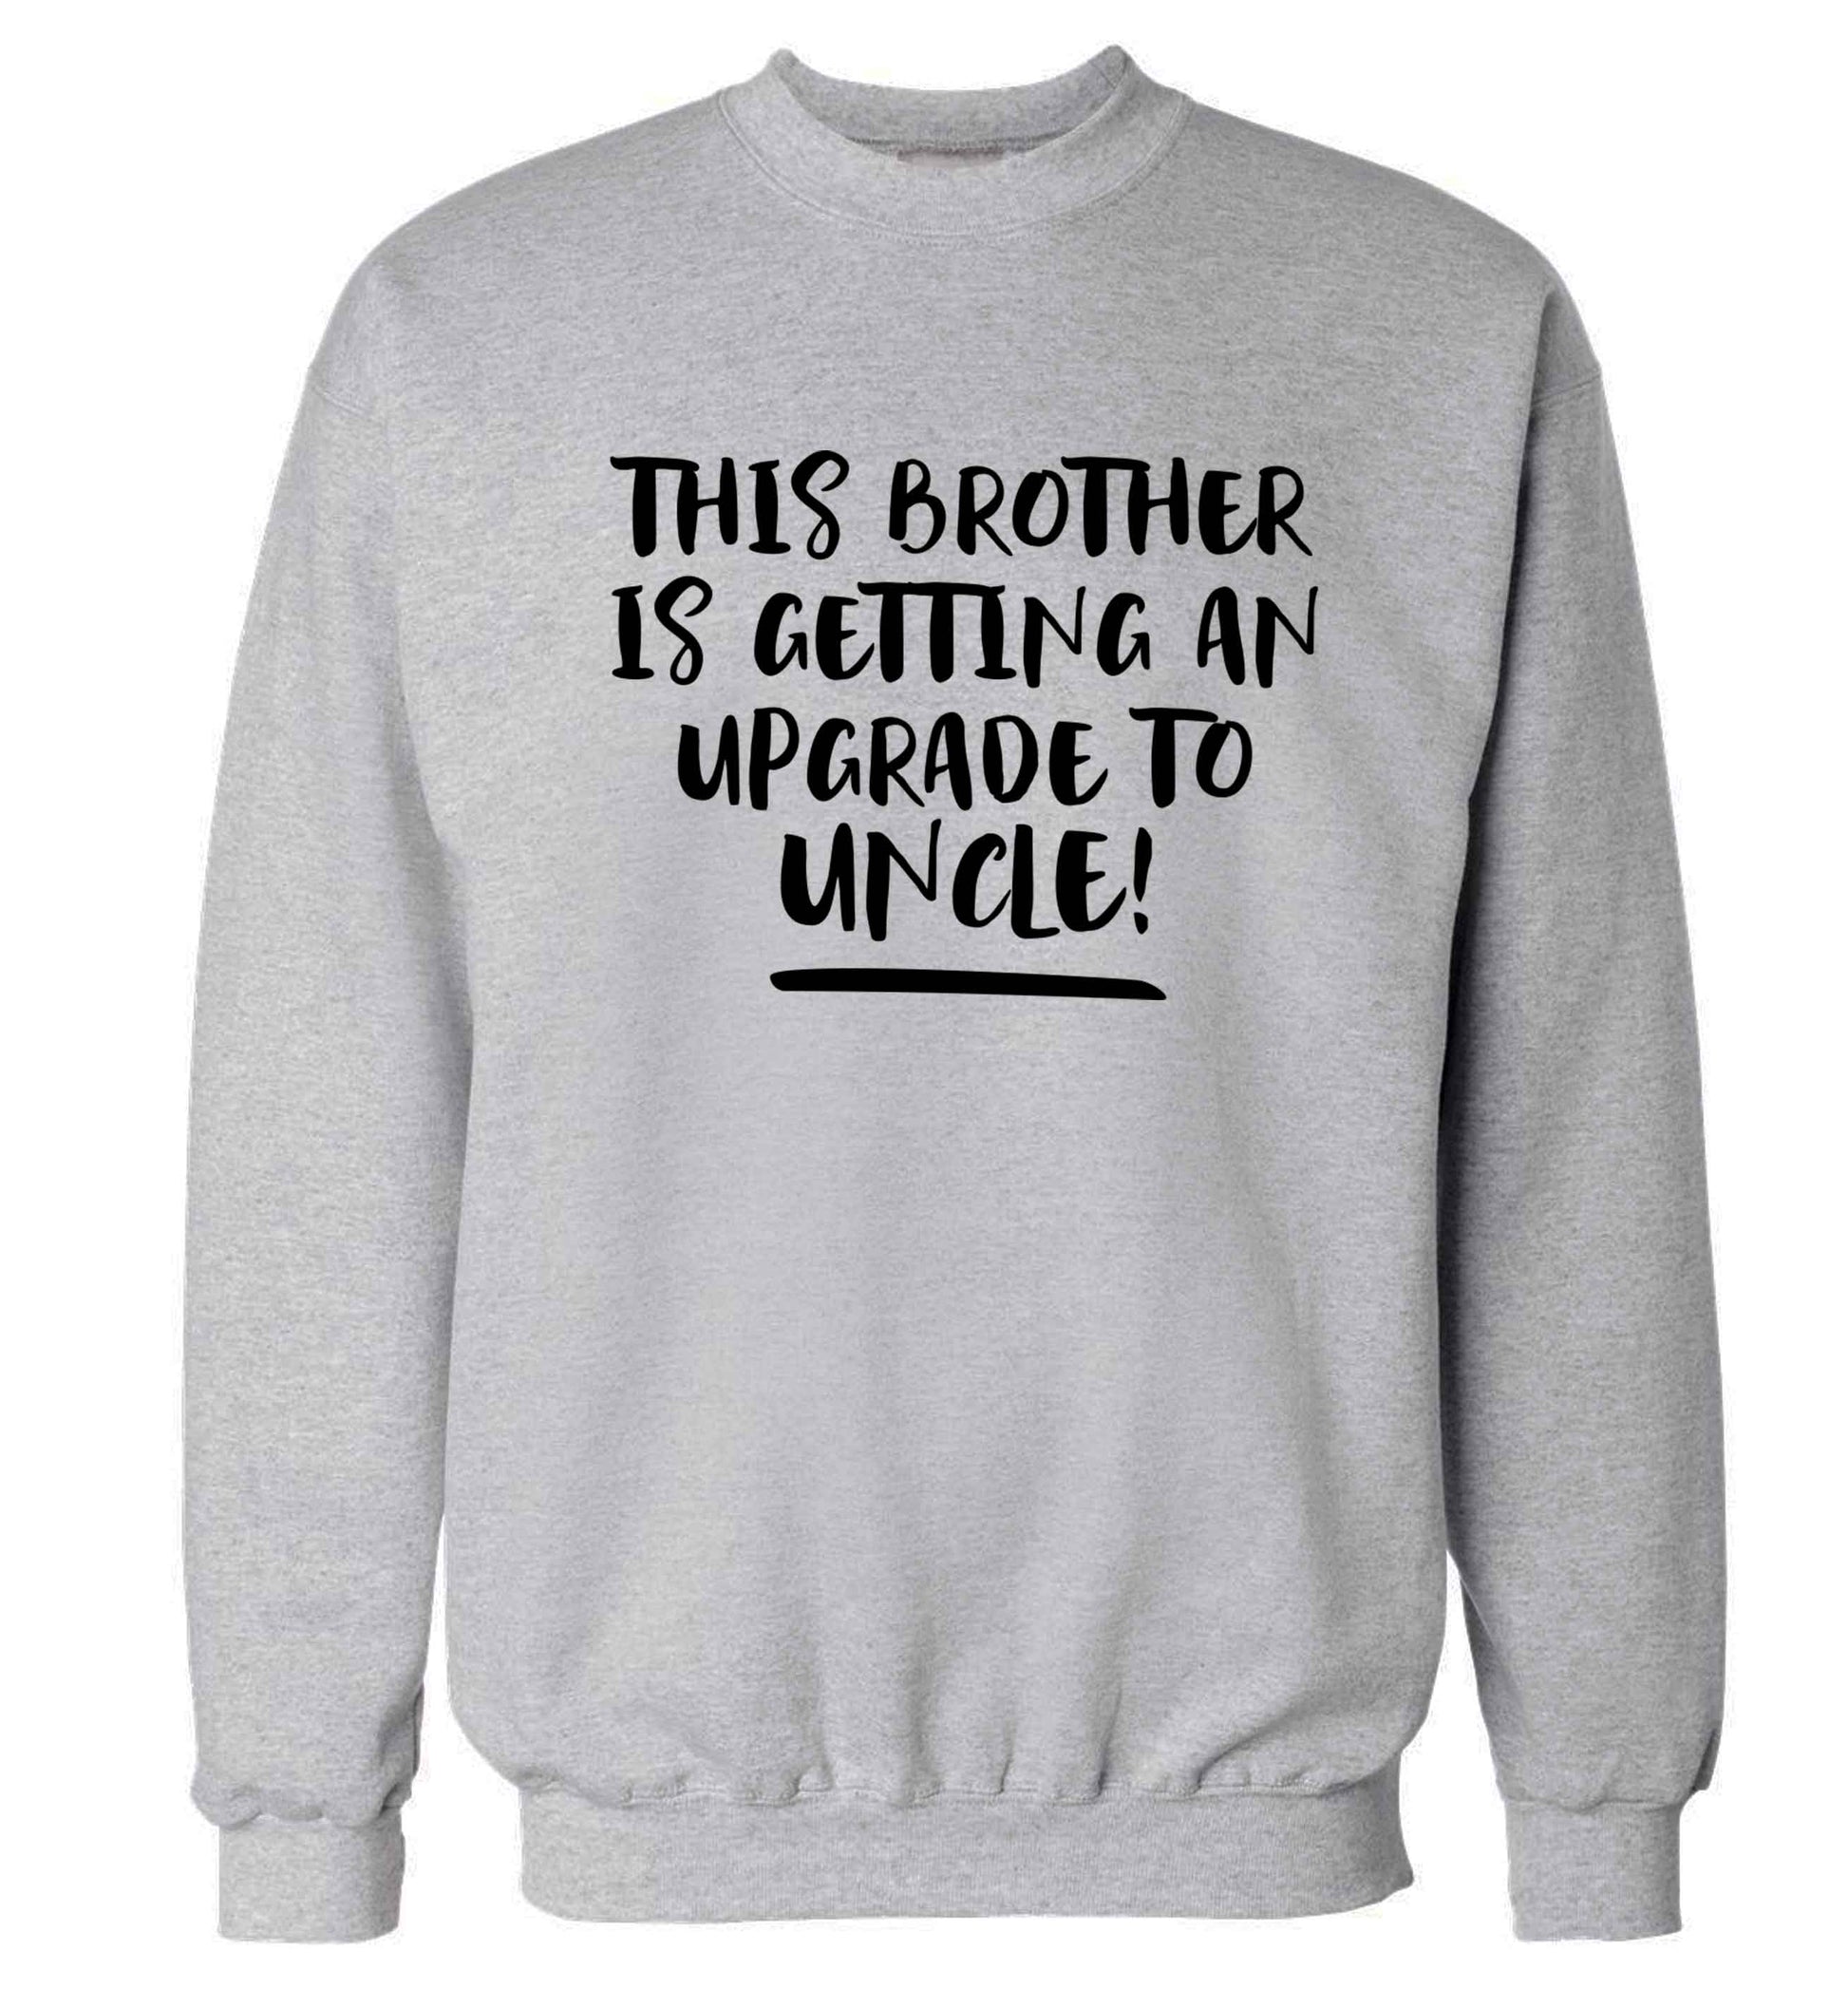 This brother is getting an upgrade to uncle! Adult's unisex grey Sweater 2XL